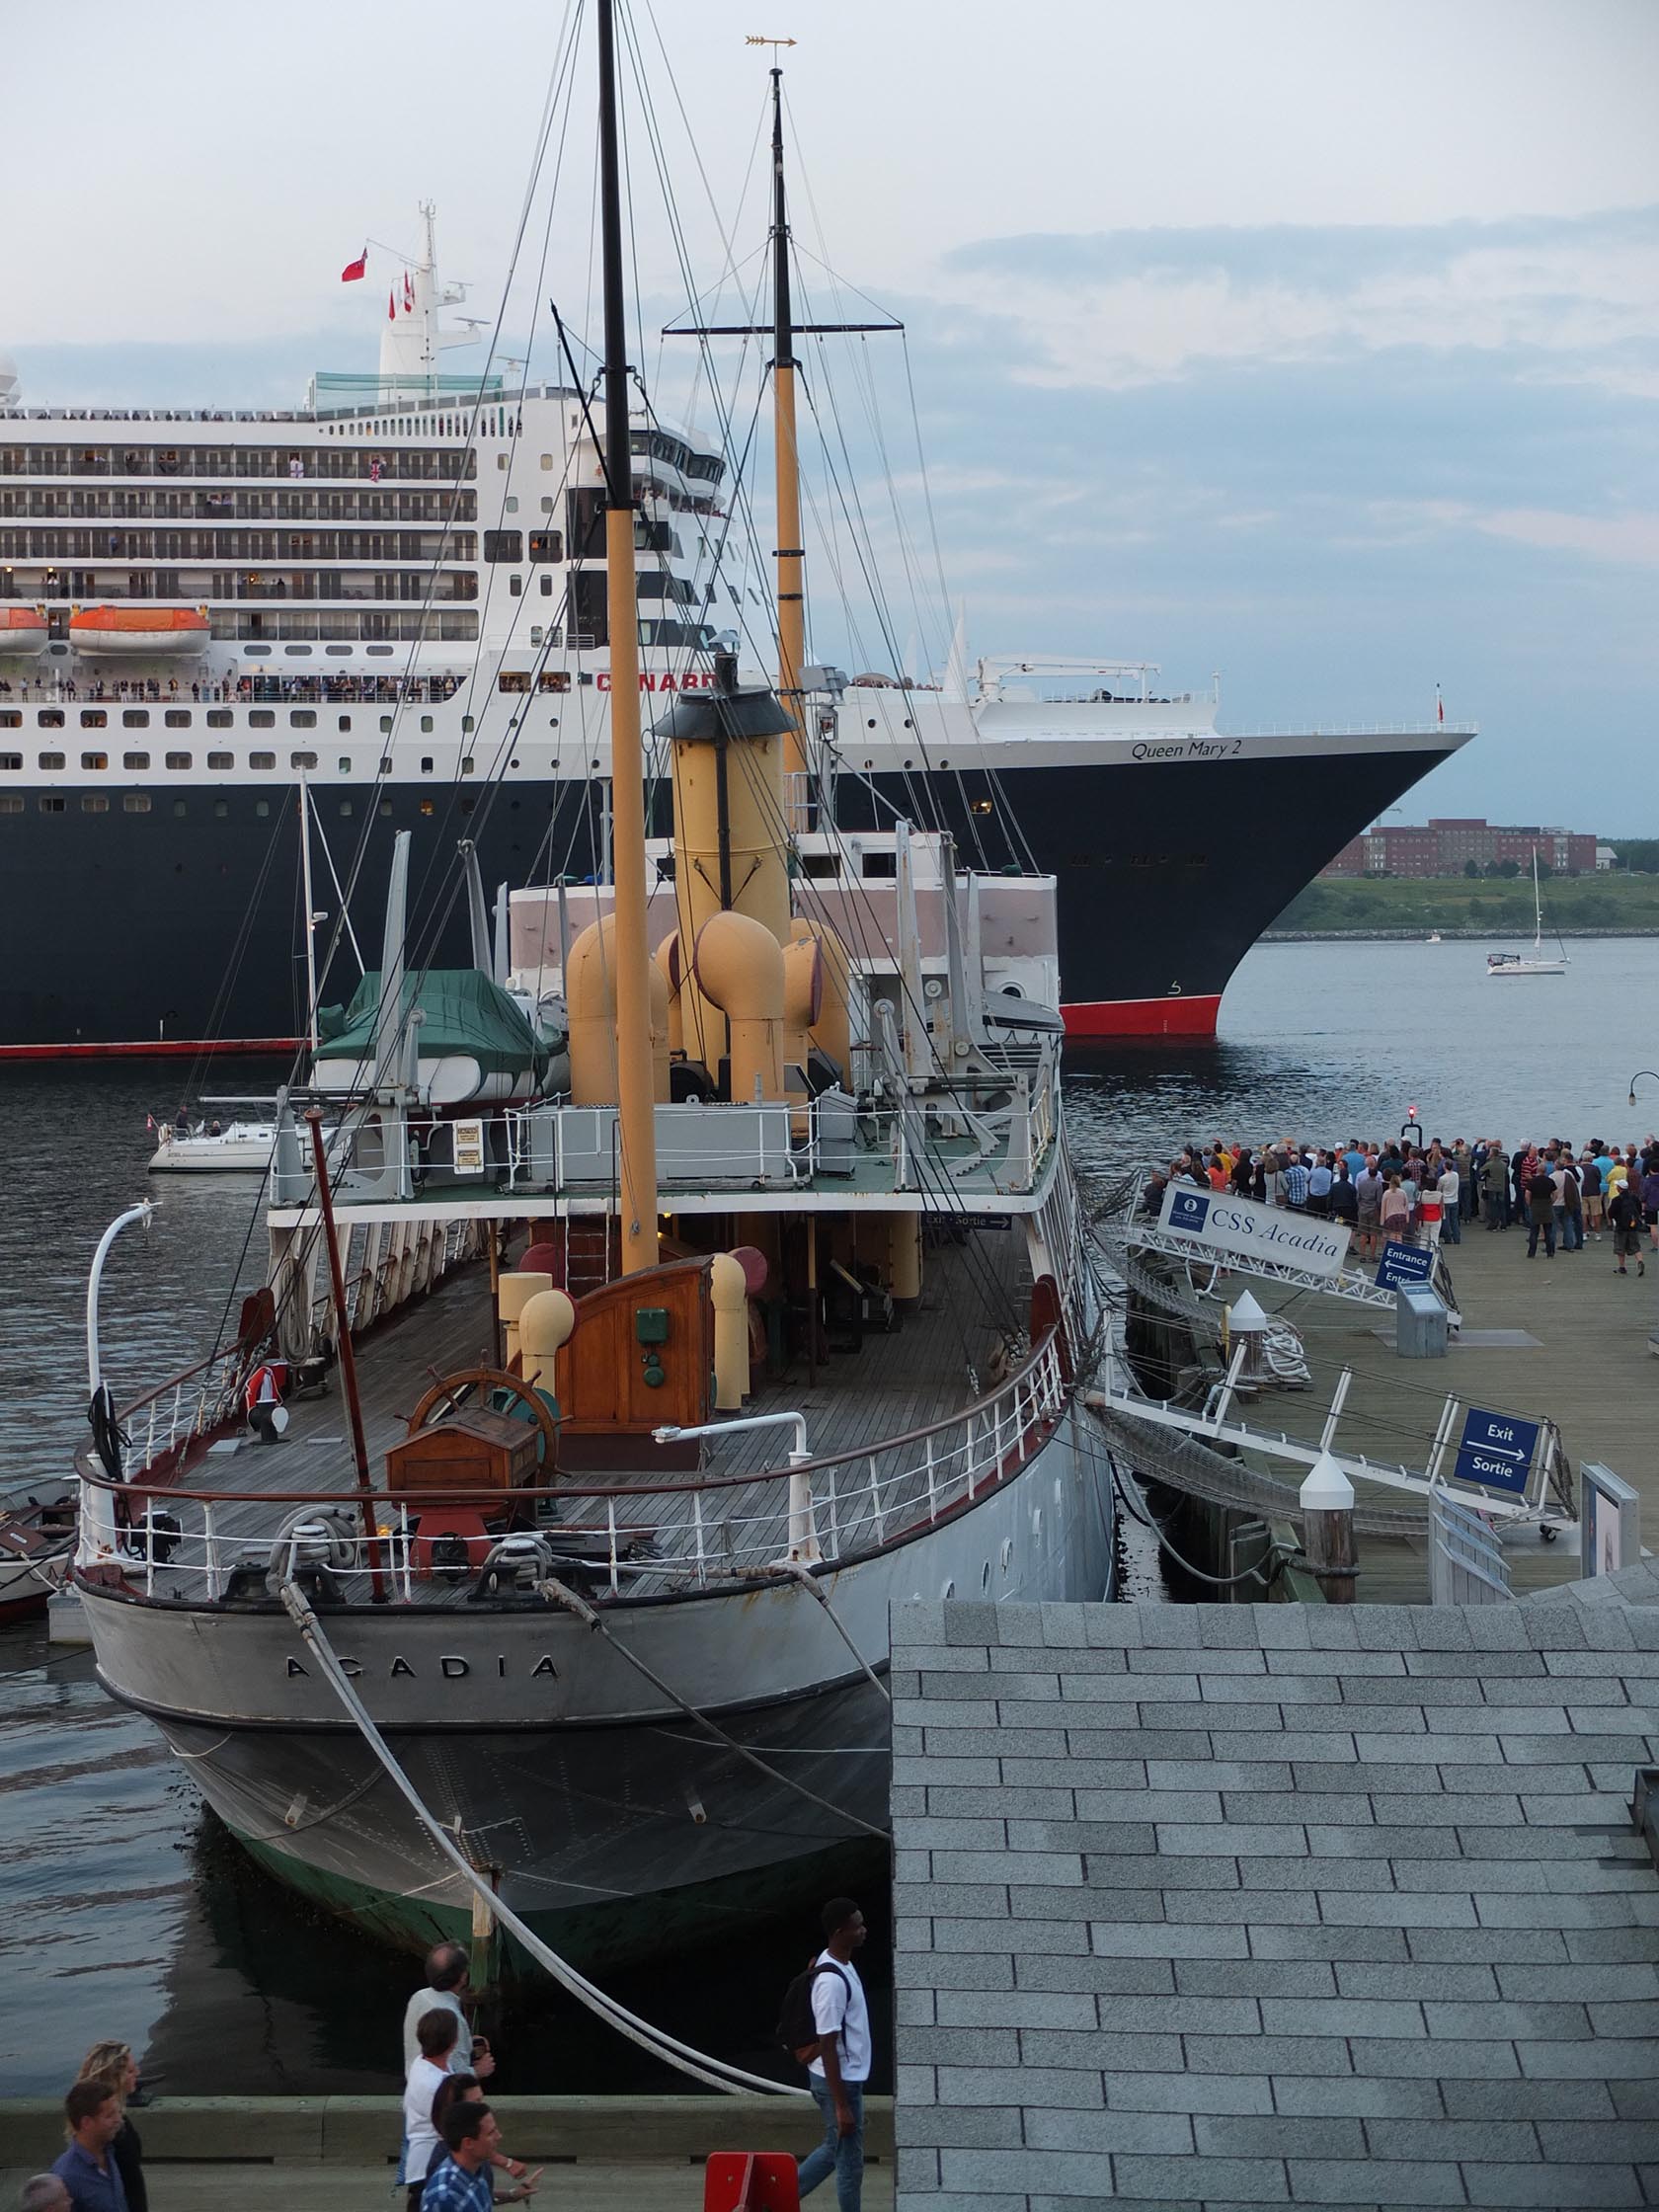 Crowds gather to watch the Cunnard Line's Queen Mary sail past the CSS Acadia